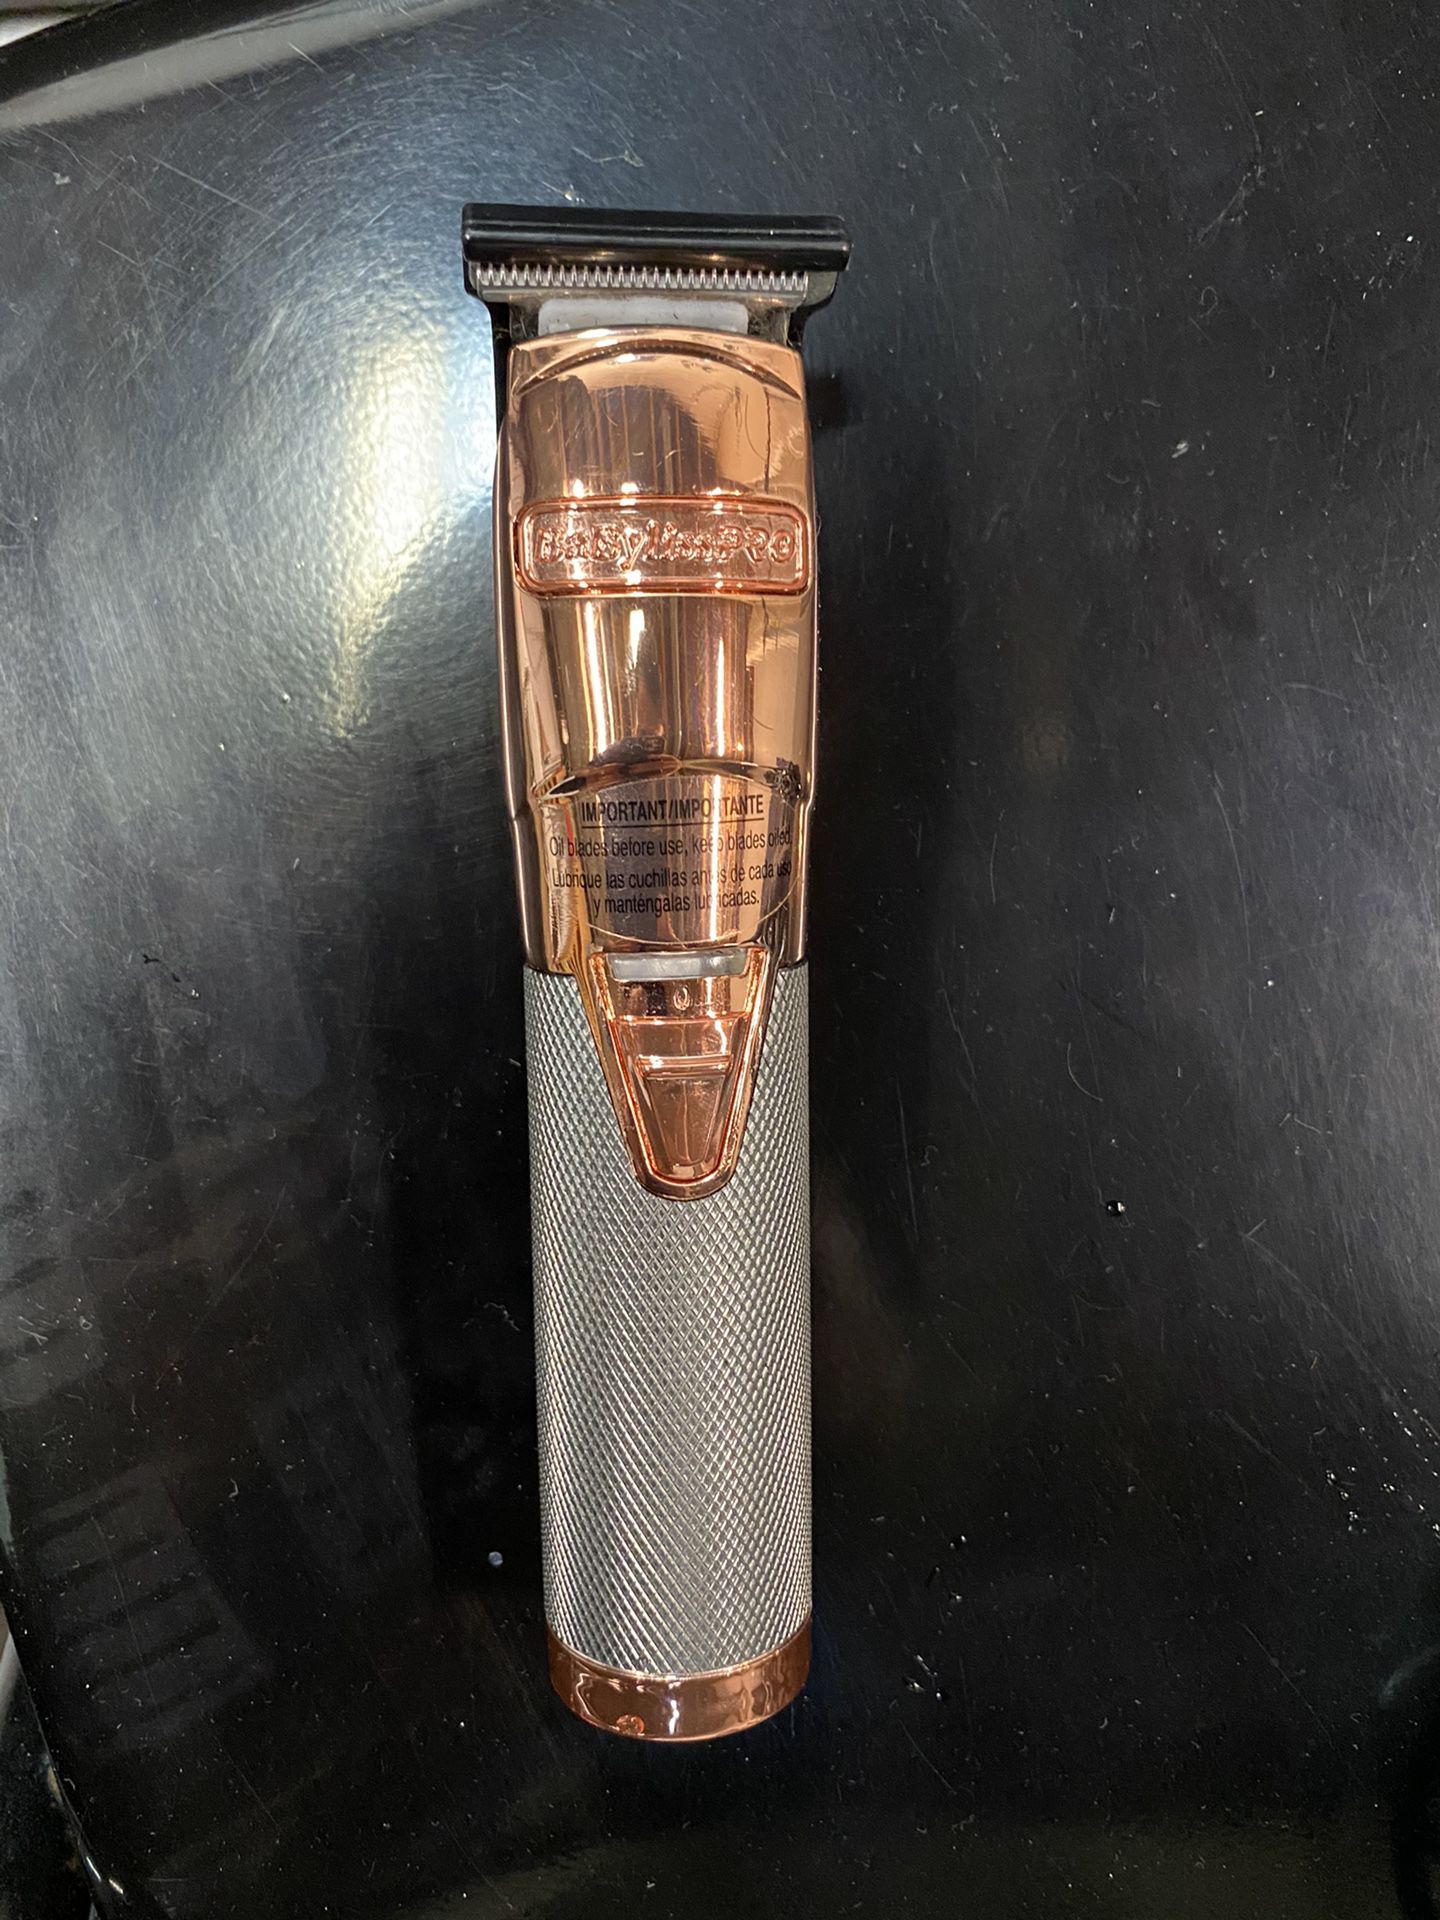 Babyliss Pro Trimmer